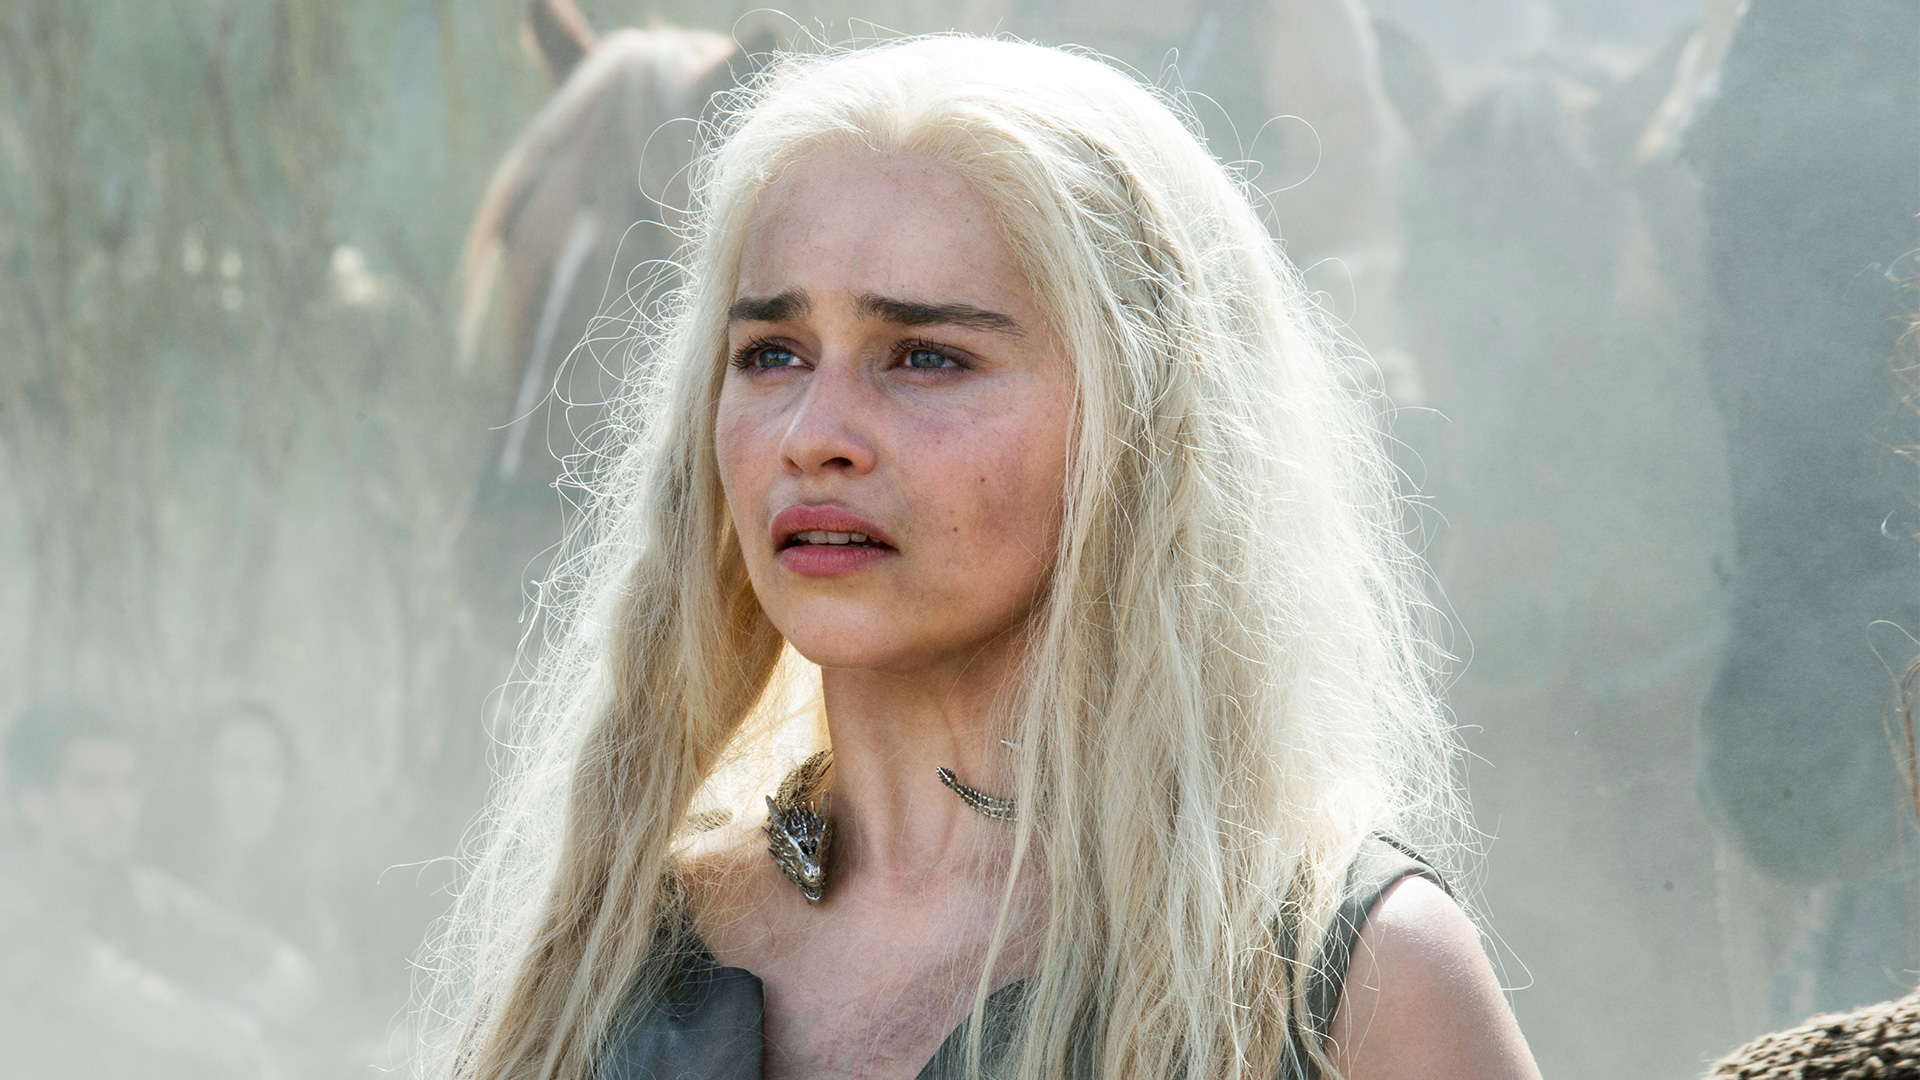 Emilia Clarke probably won't be back for that Game of Thrones sequel series  | GamesRadar+